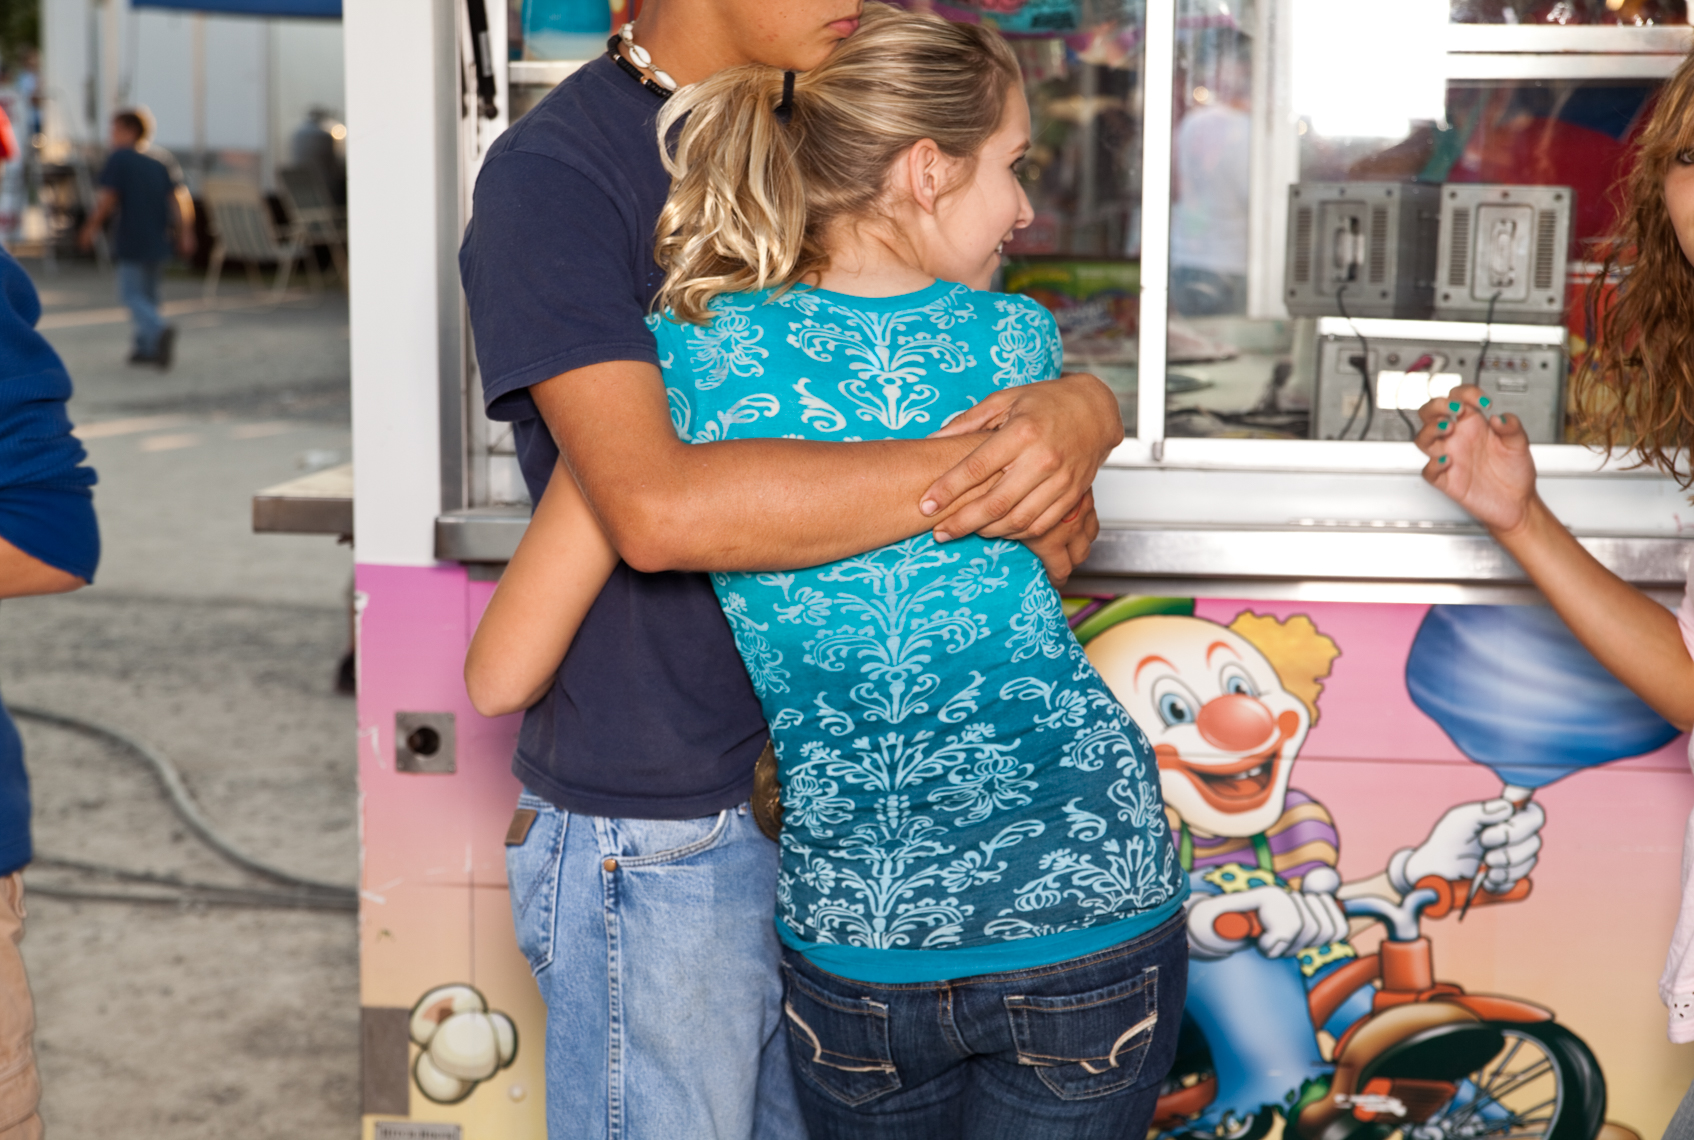 Young teen couple,  Wilson County Fair, Lebanon, Tennessee, carnival, amusement park, rural south, cotton candy, food truck